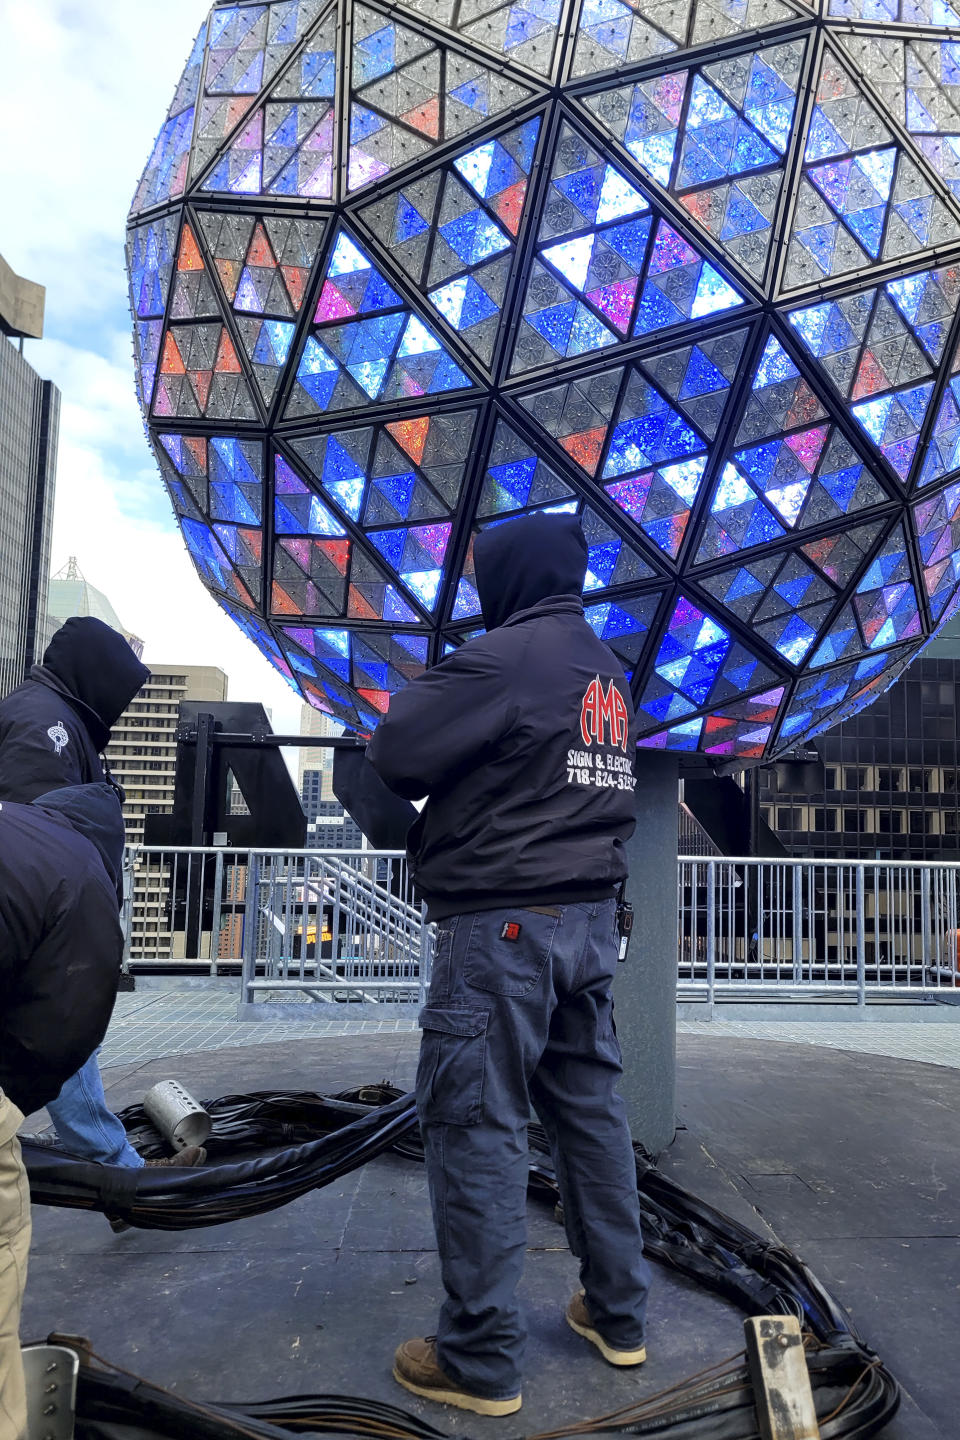 Workers test the lights on the New Year's Eve ball in Times Square on Saturday, Dec. 30, 2023 in New York. With throngs of revelers set to usher in the new year under the bright lights of Times Square, officials and organizers say they are prepared to welcome the crowds and ensure their safety. (AP Photo/Julie Walker)